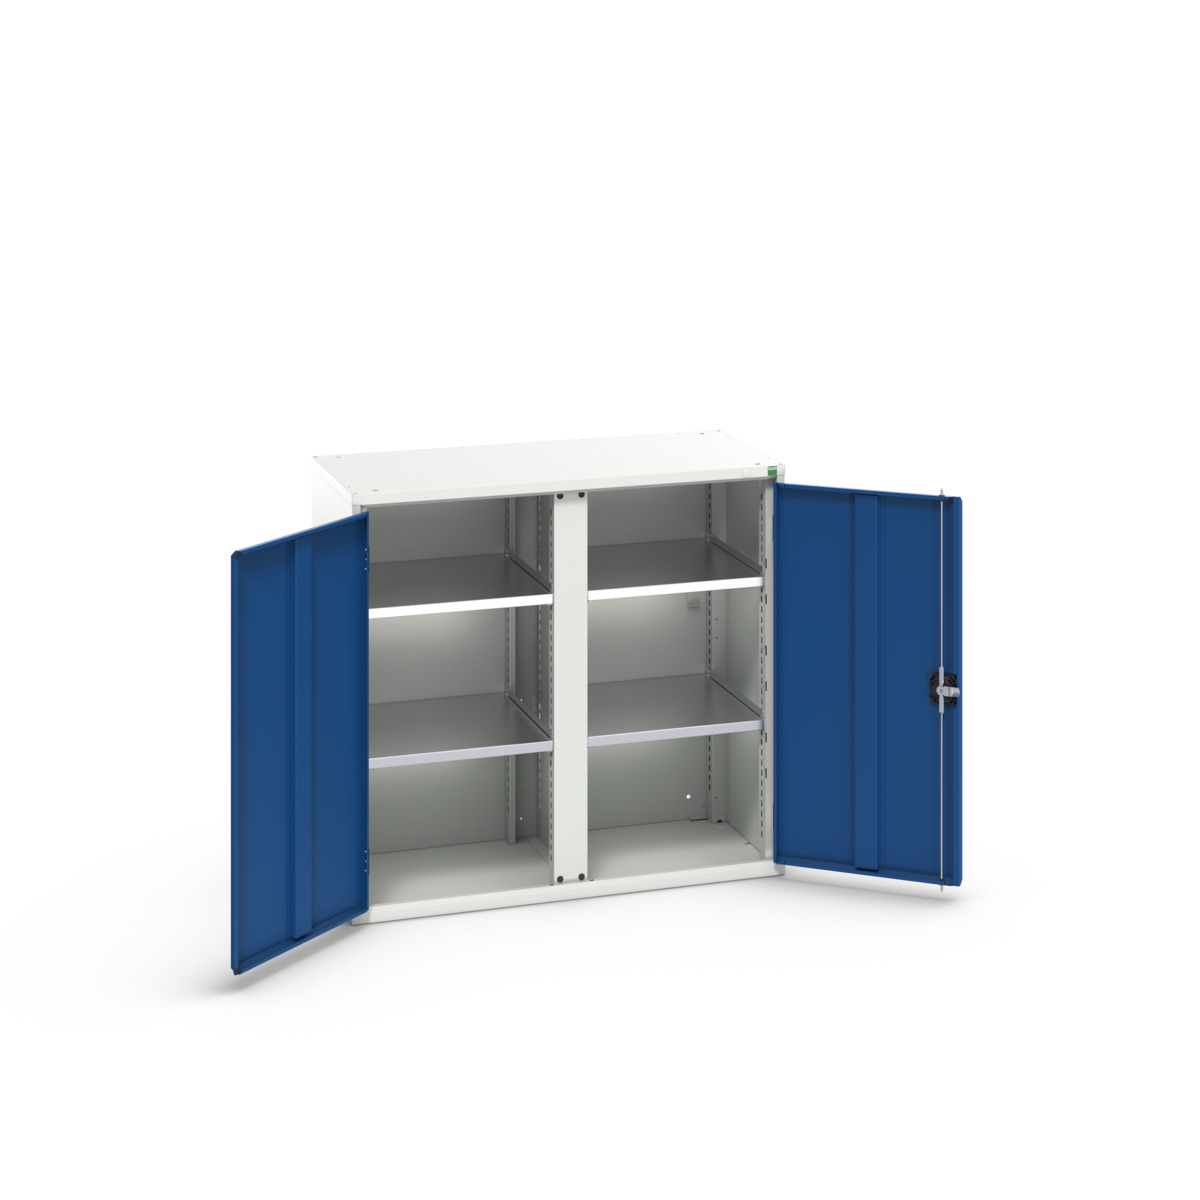 16926555.11 - verso kitted cupboard